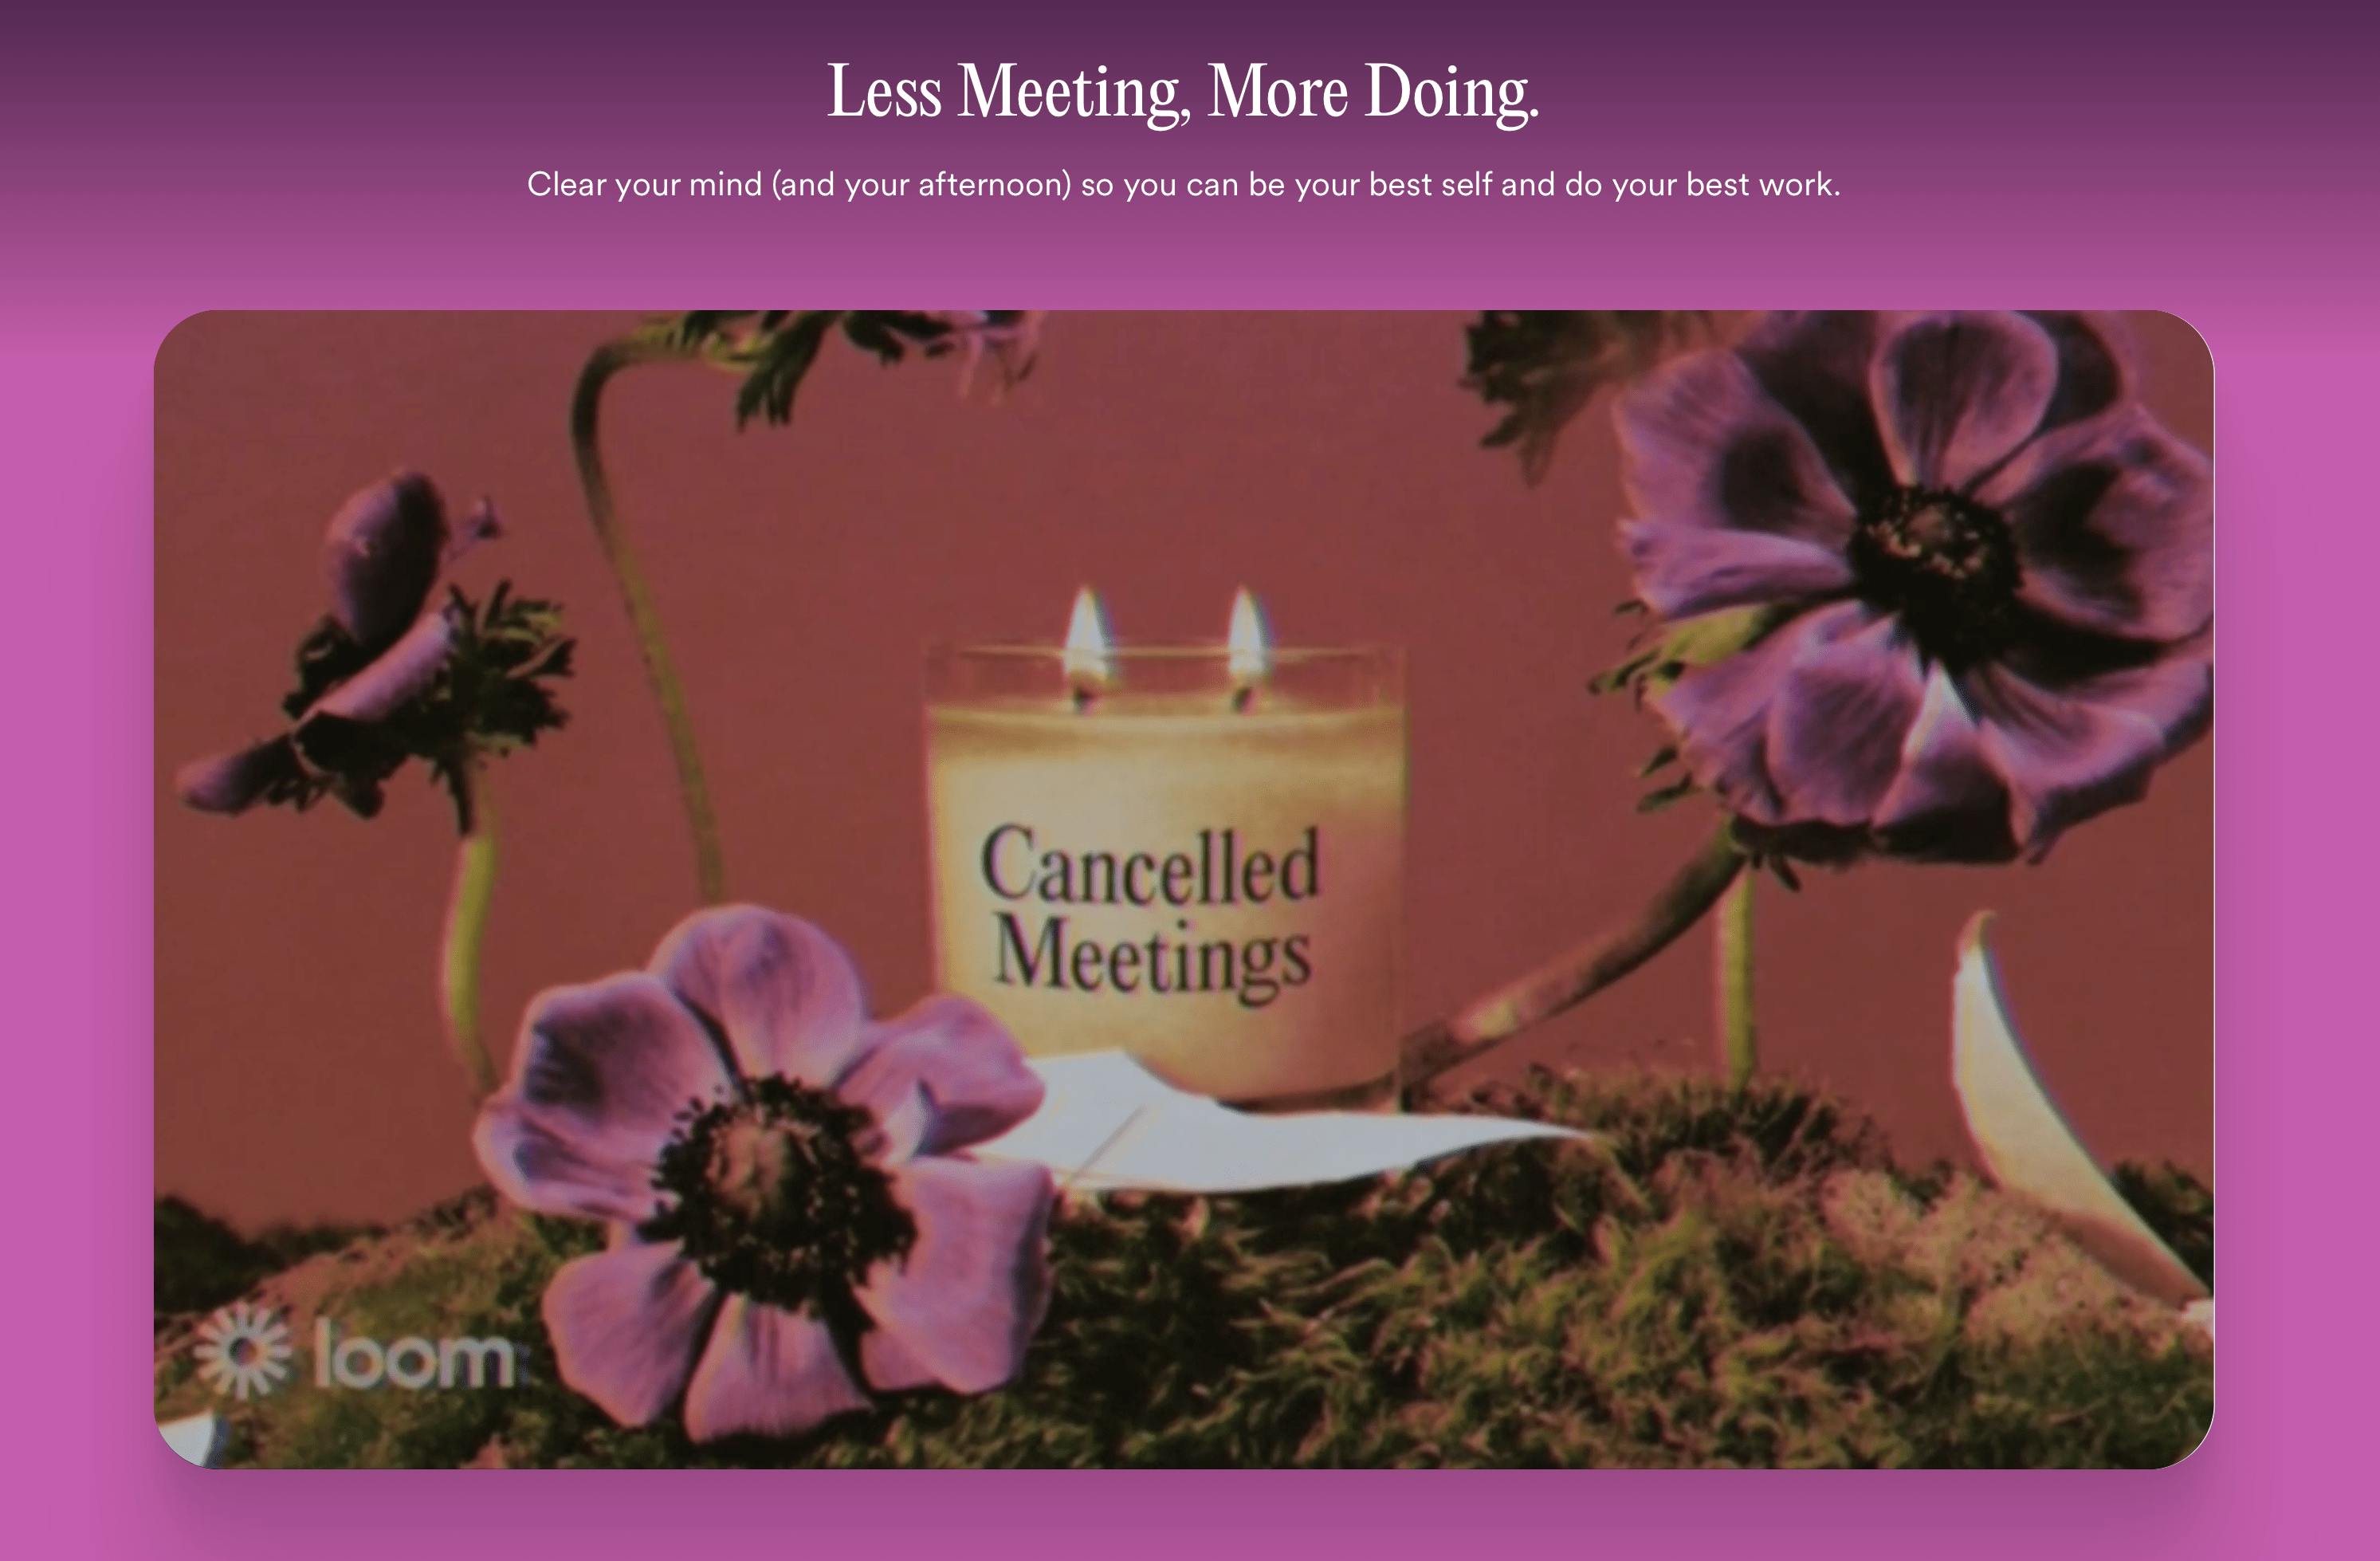 Less meeting, more doing